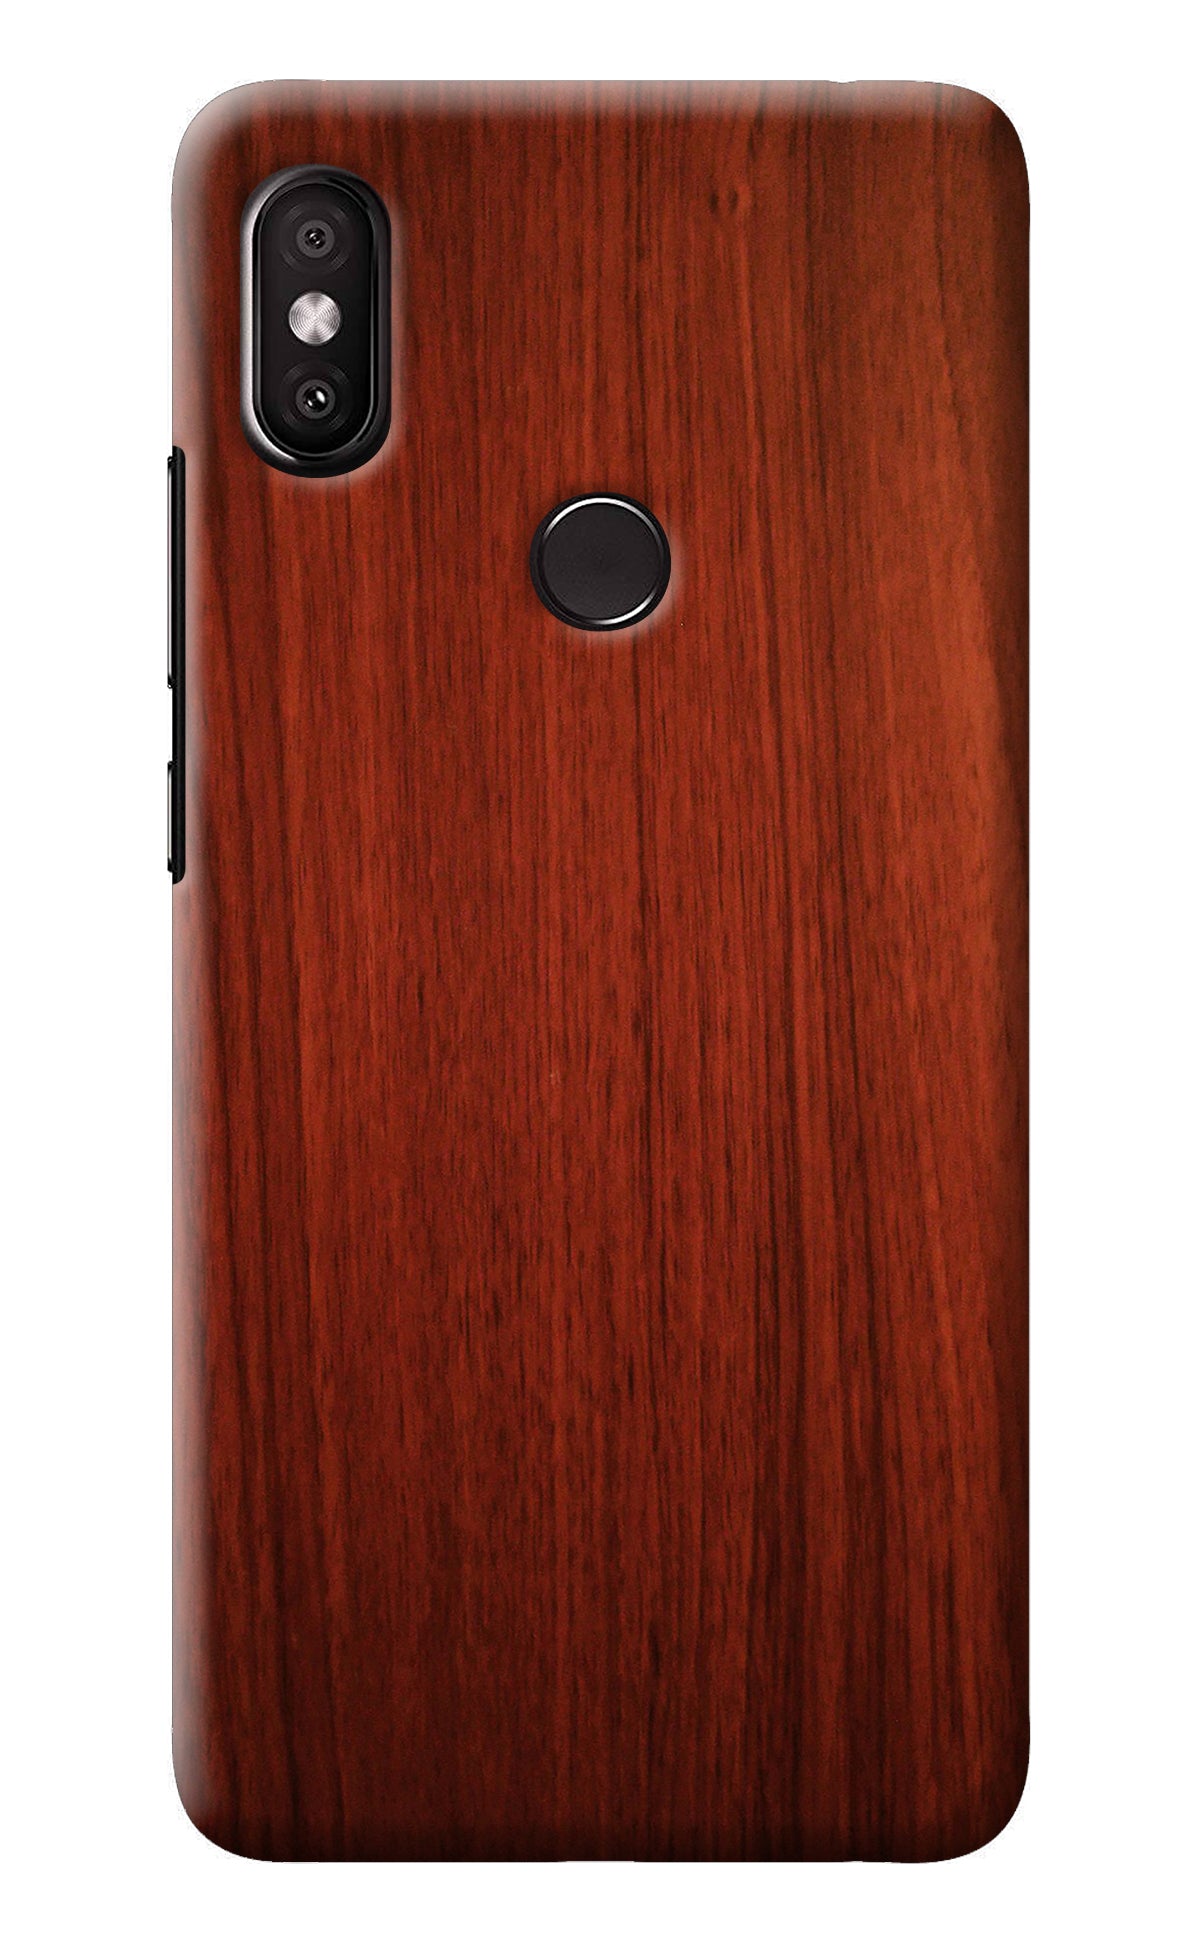 Wooden Plain Pattern Redmi Y2 Back Cover